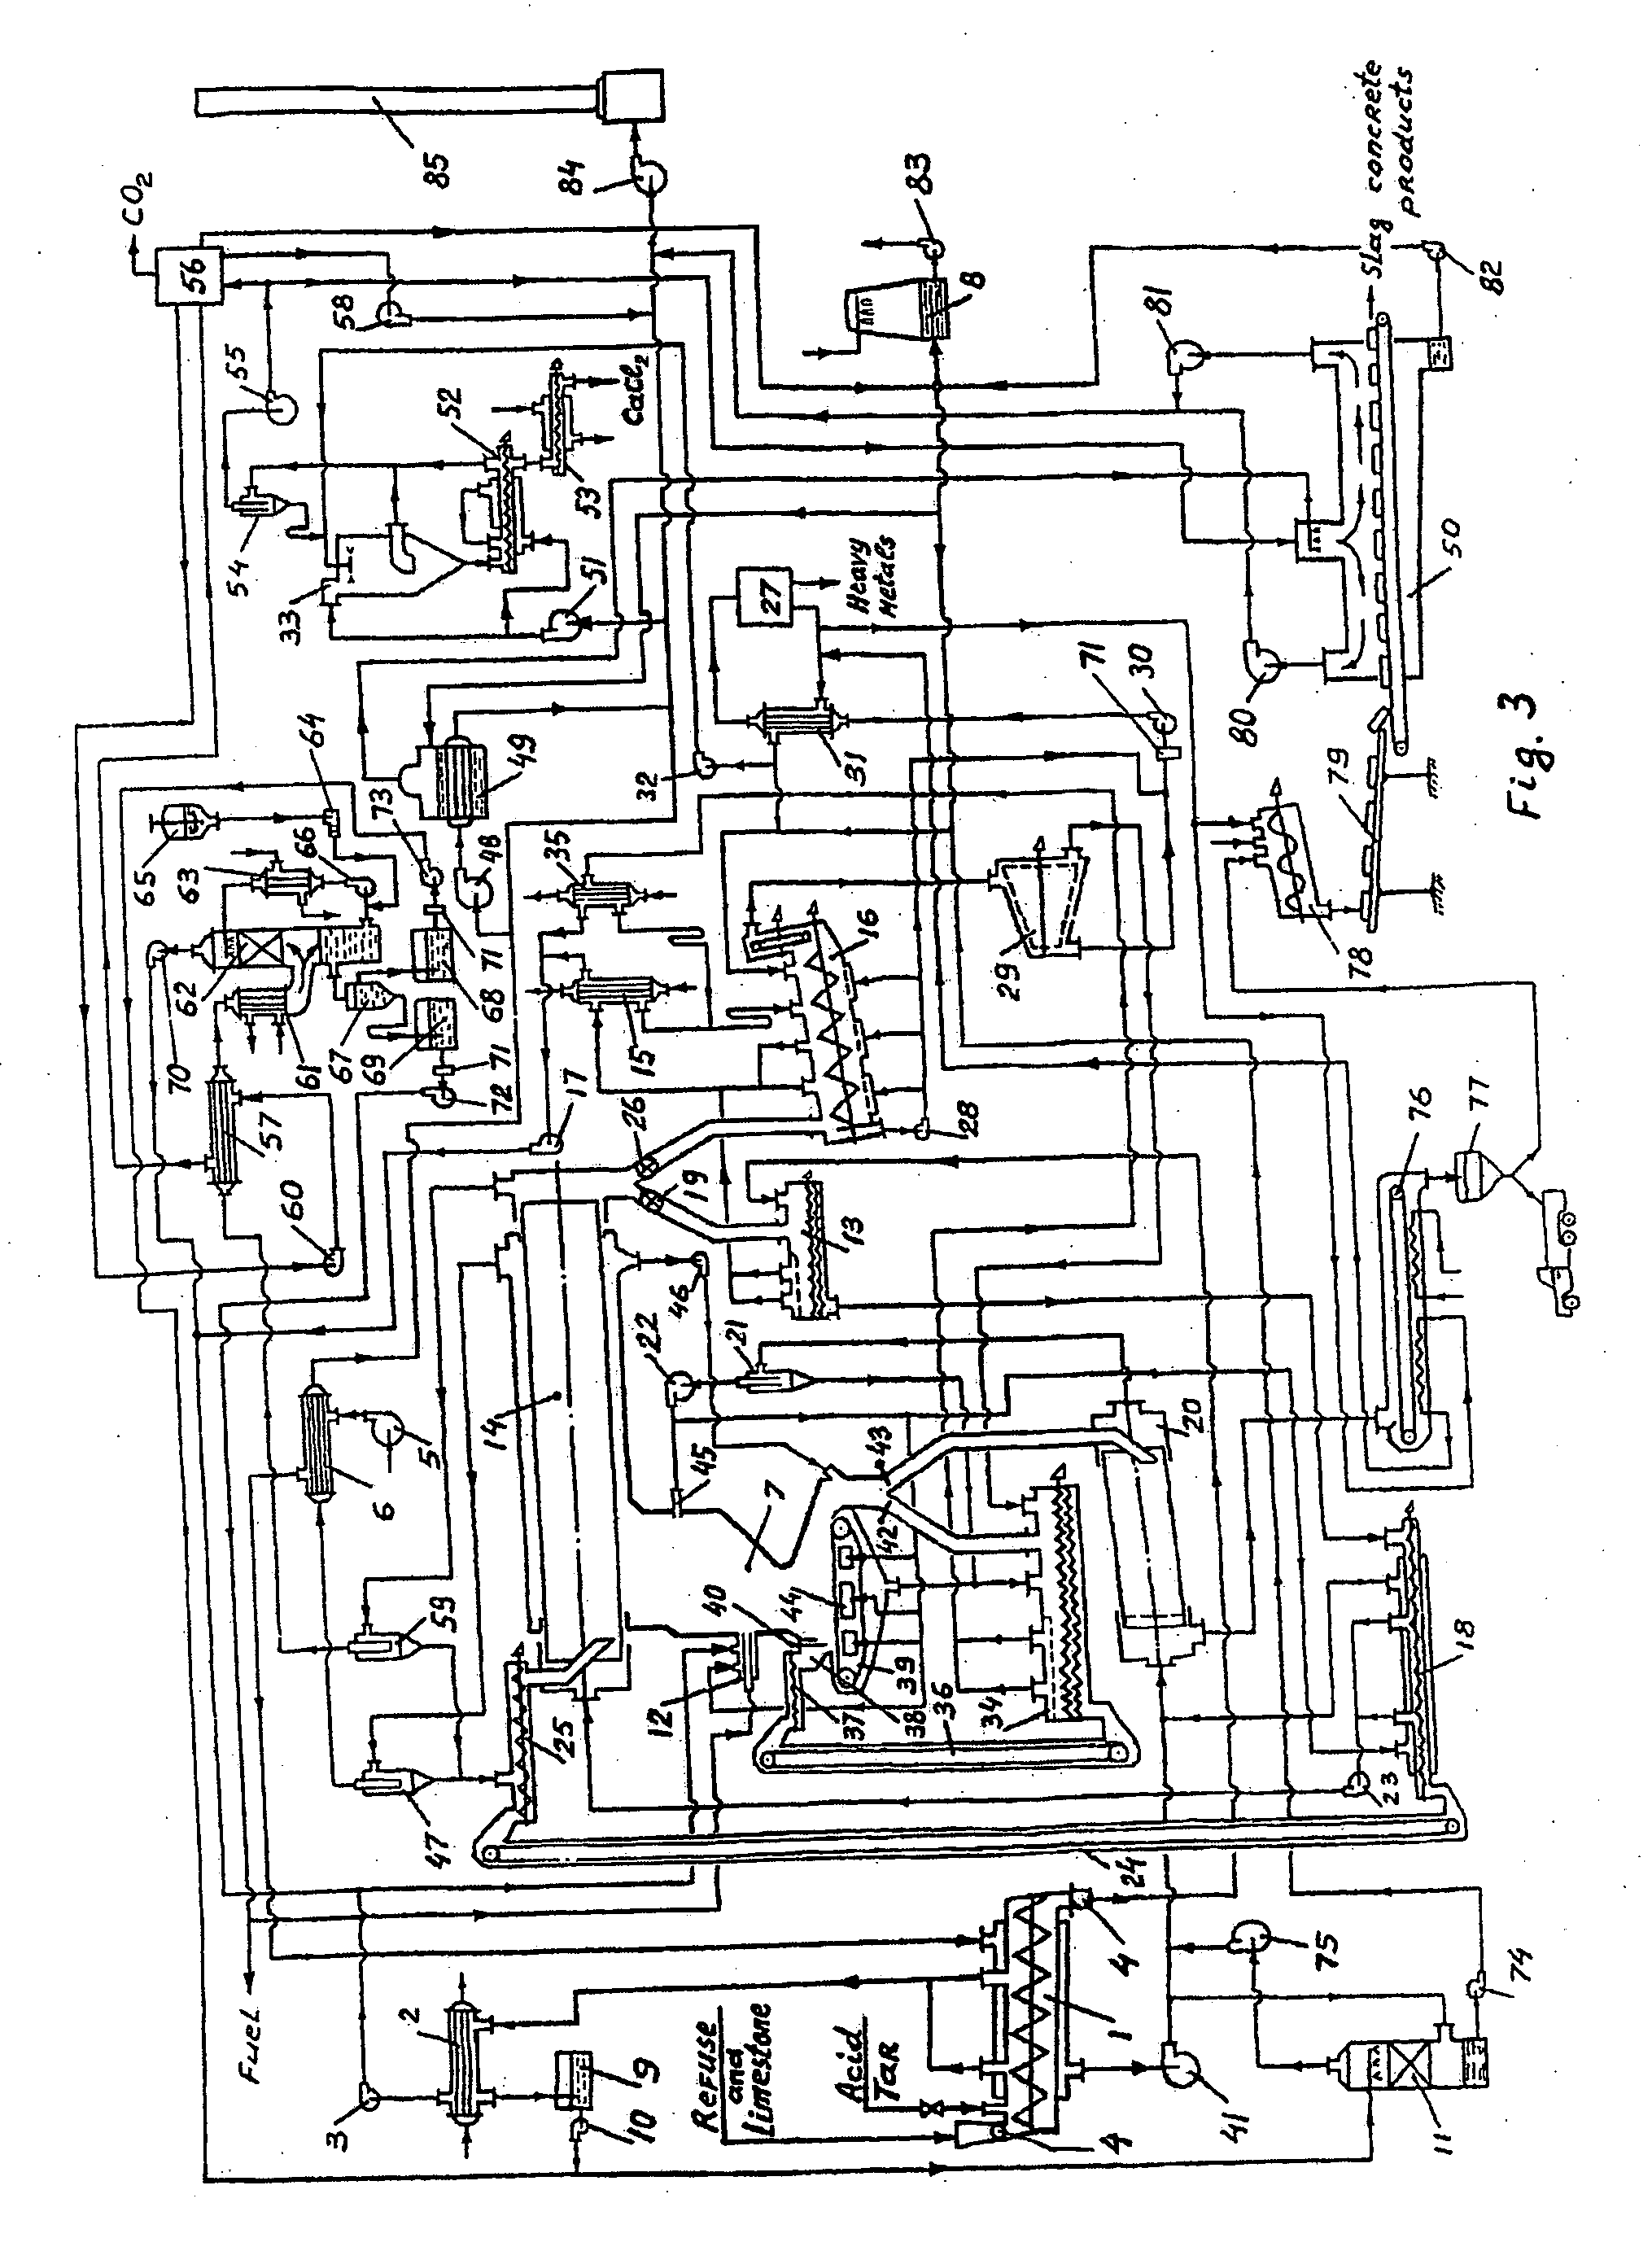 Method and plant for processing waste